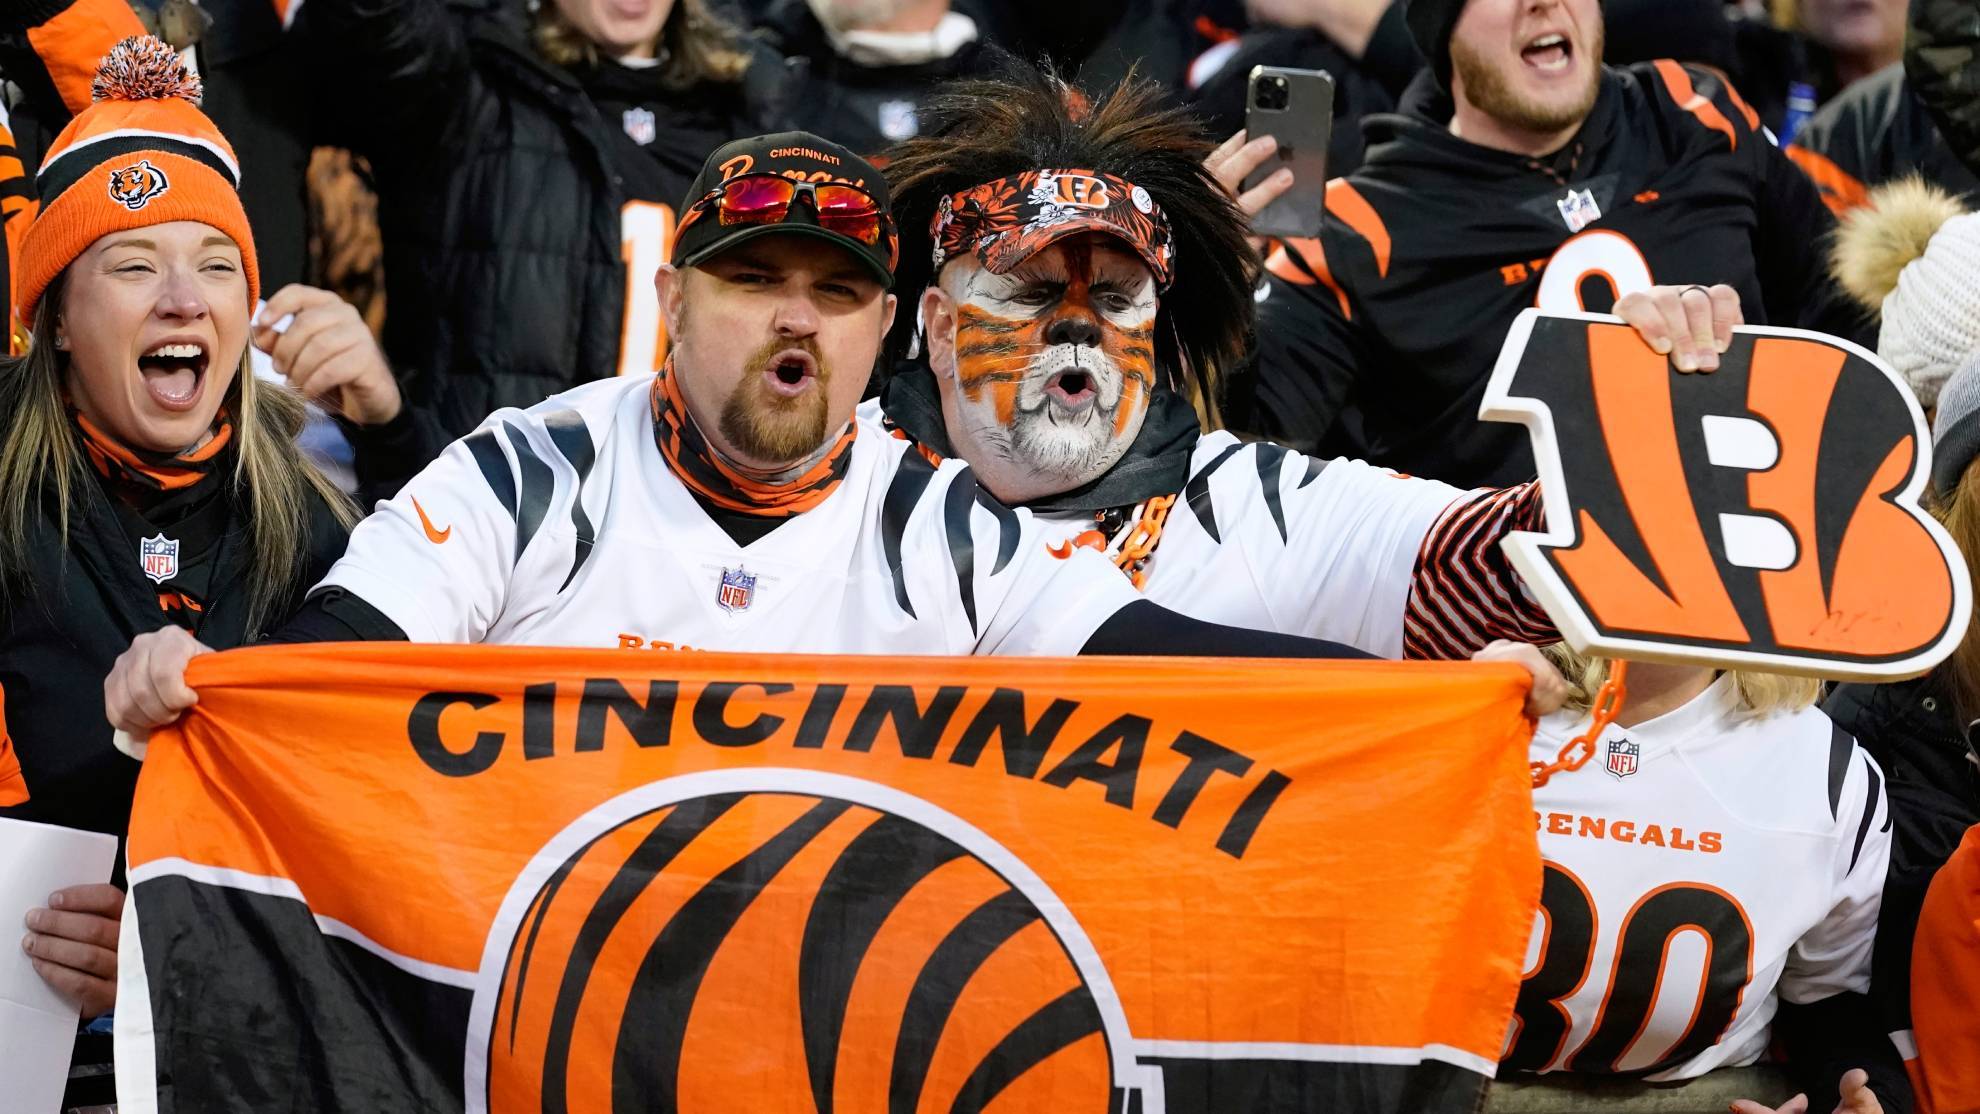 Cincinnati Bengals, one of 12 teams that have never won the Super Bowl